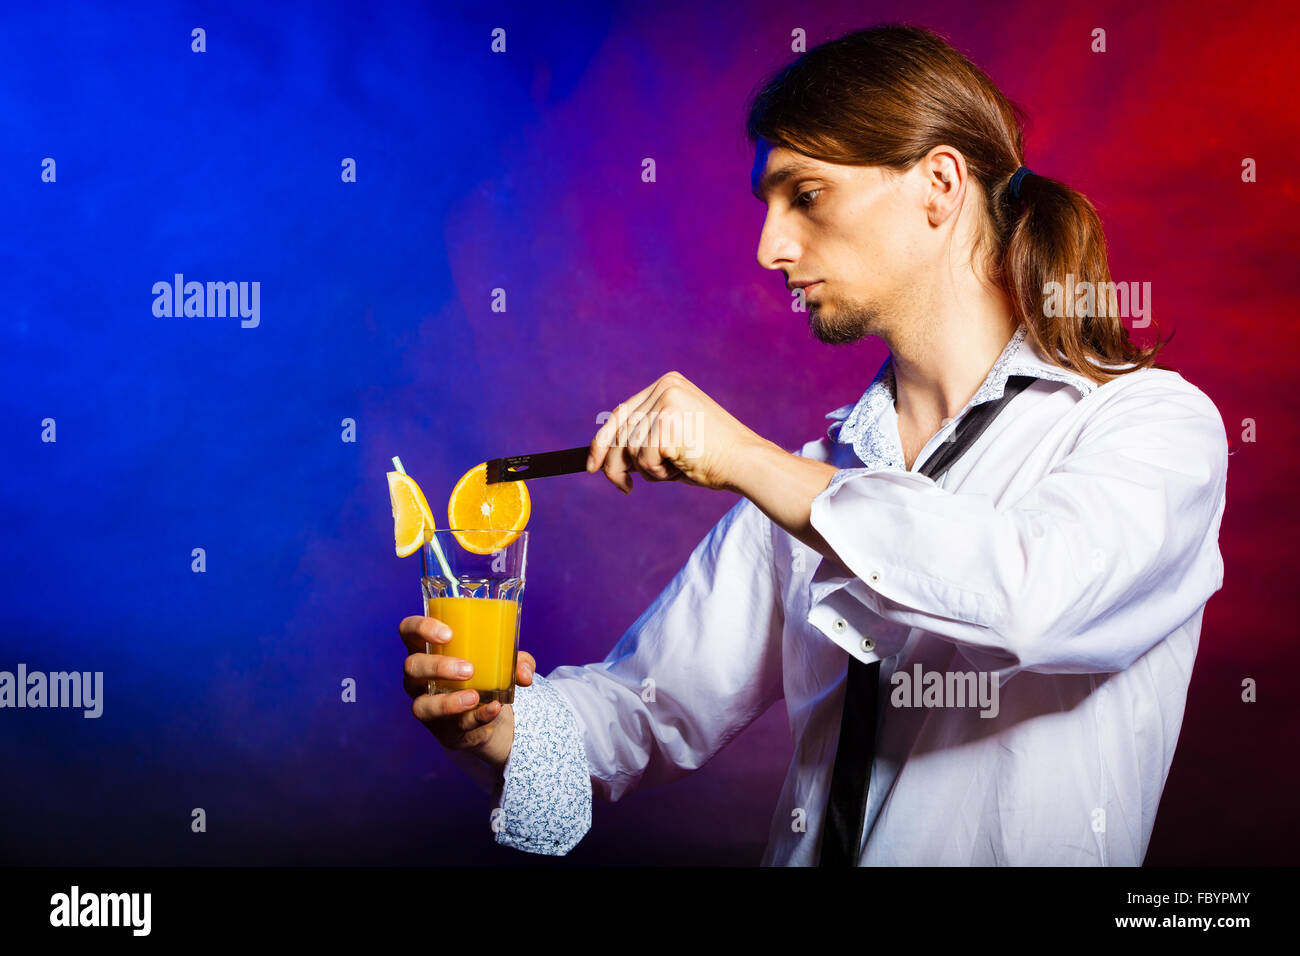 Young man bartender preparing alcohol cocktail drink Stock Photo